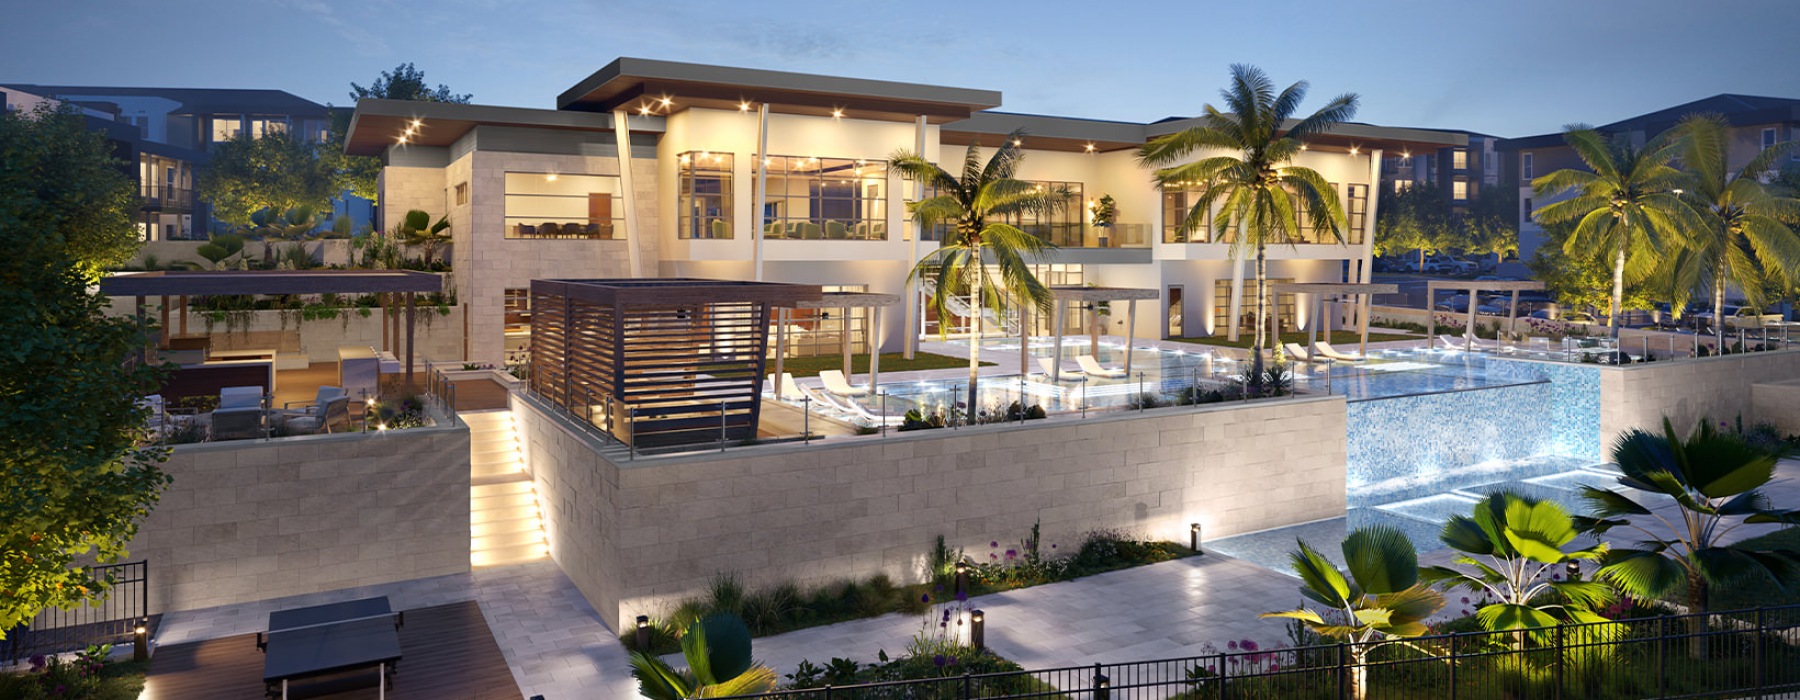 External rendering of the clubhouse and the pool in San Antonio luxury apartments